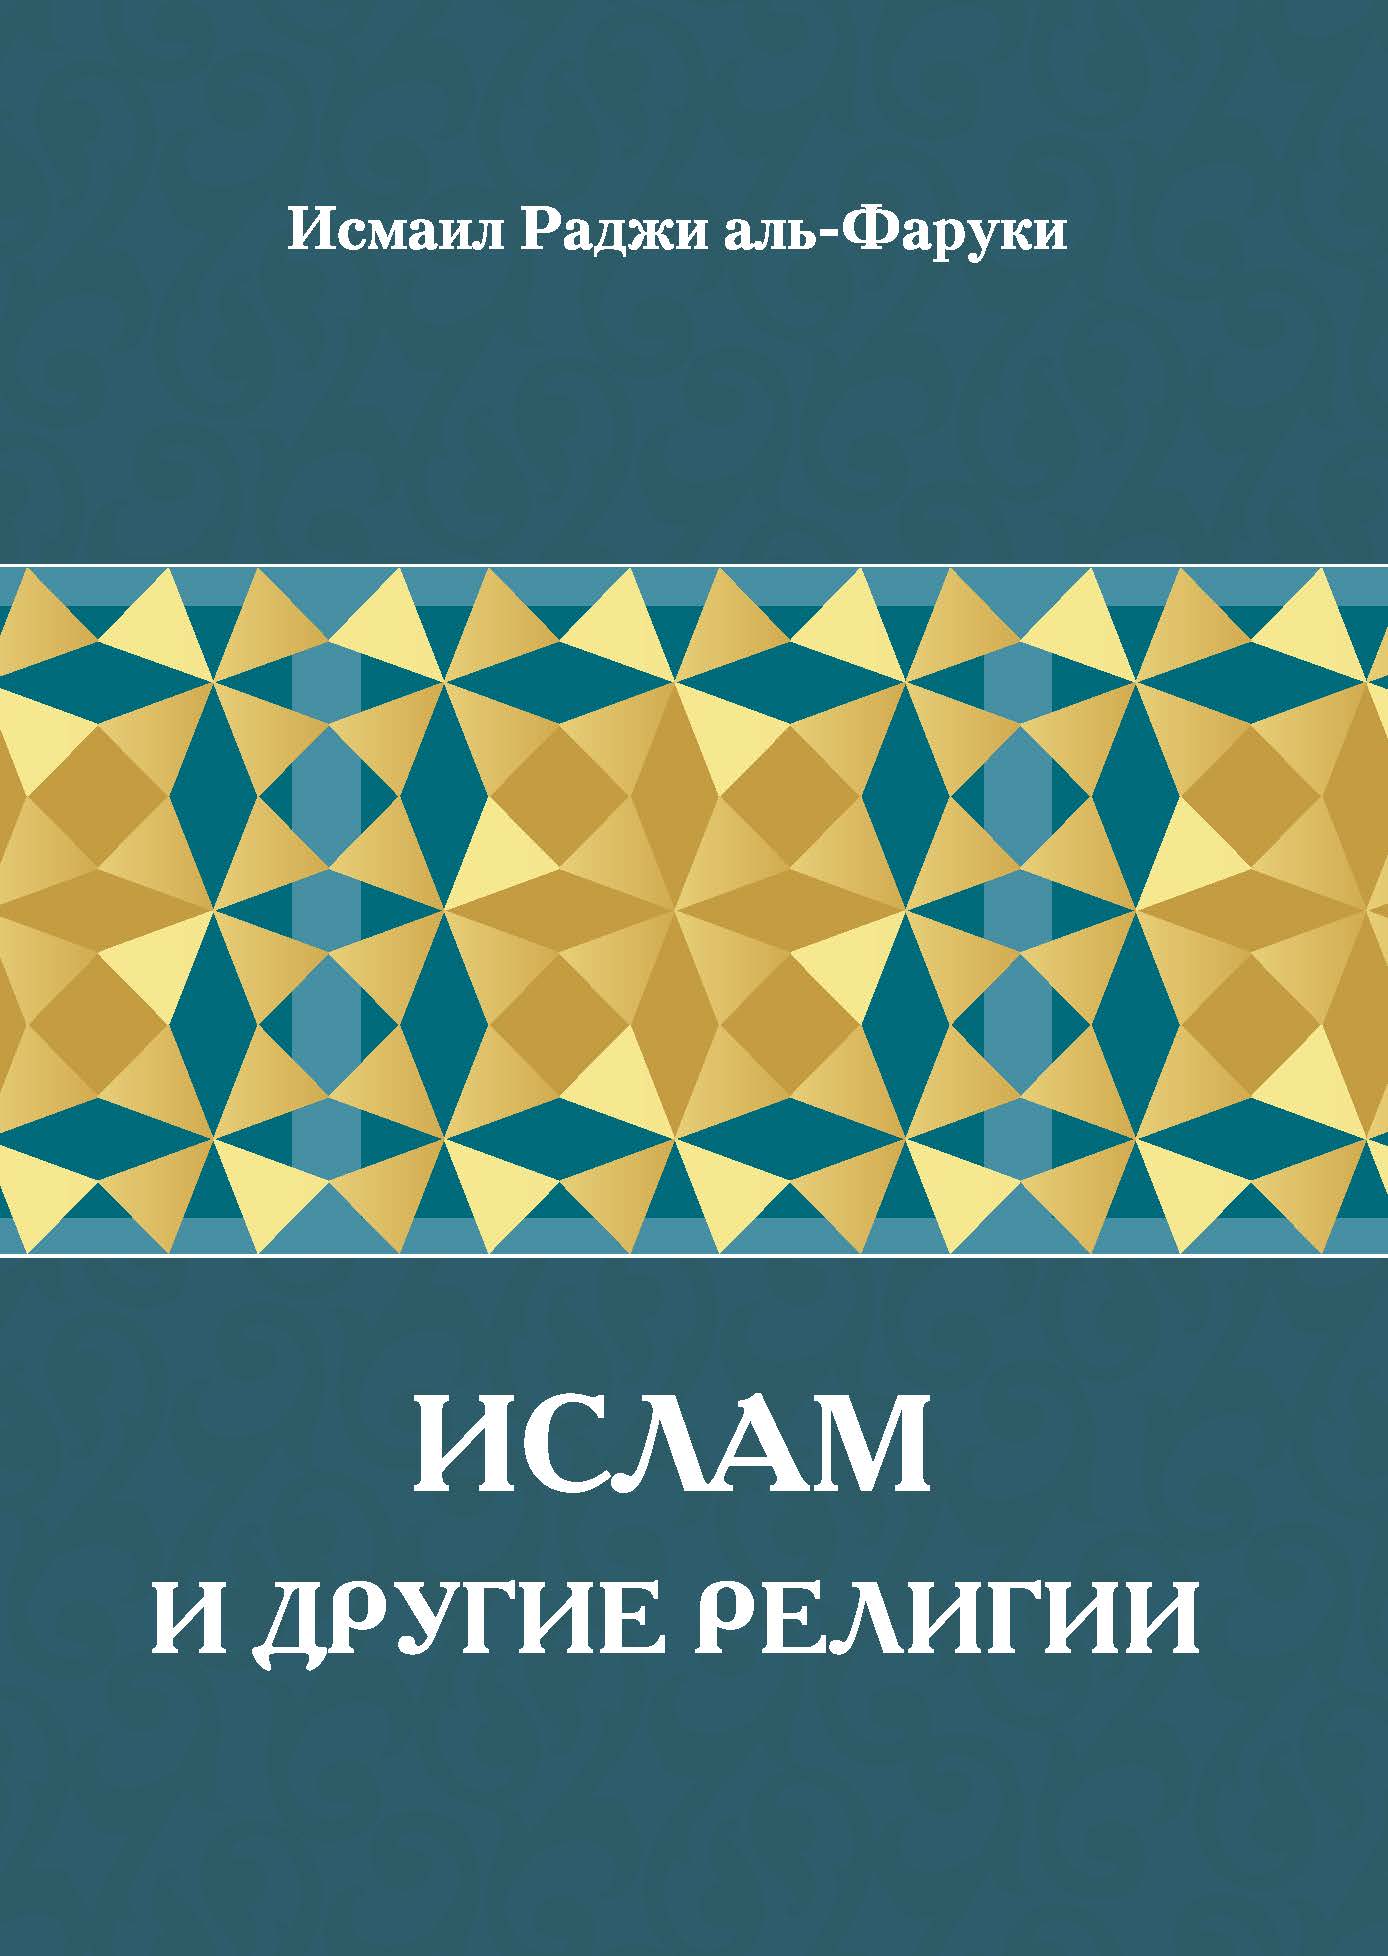 Russian: ИСЛАМ И ДРУГИЕ РЕЛИГИИ (Islam and Other Faiths)